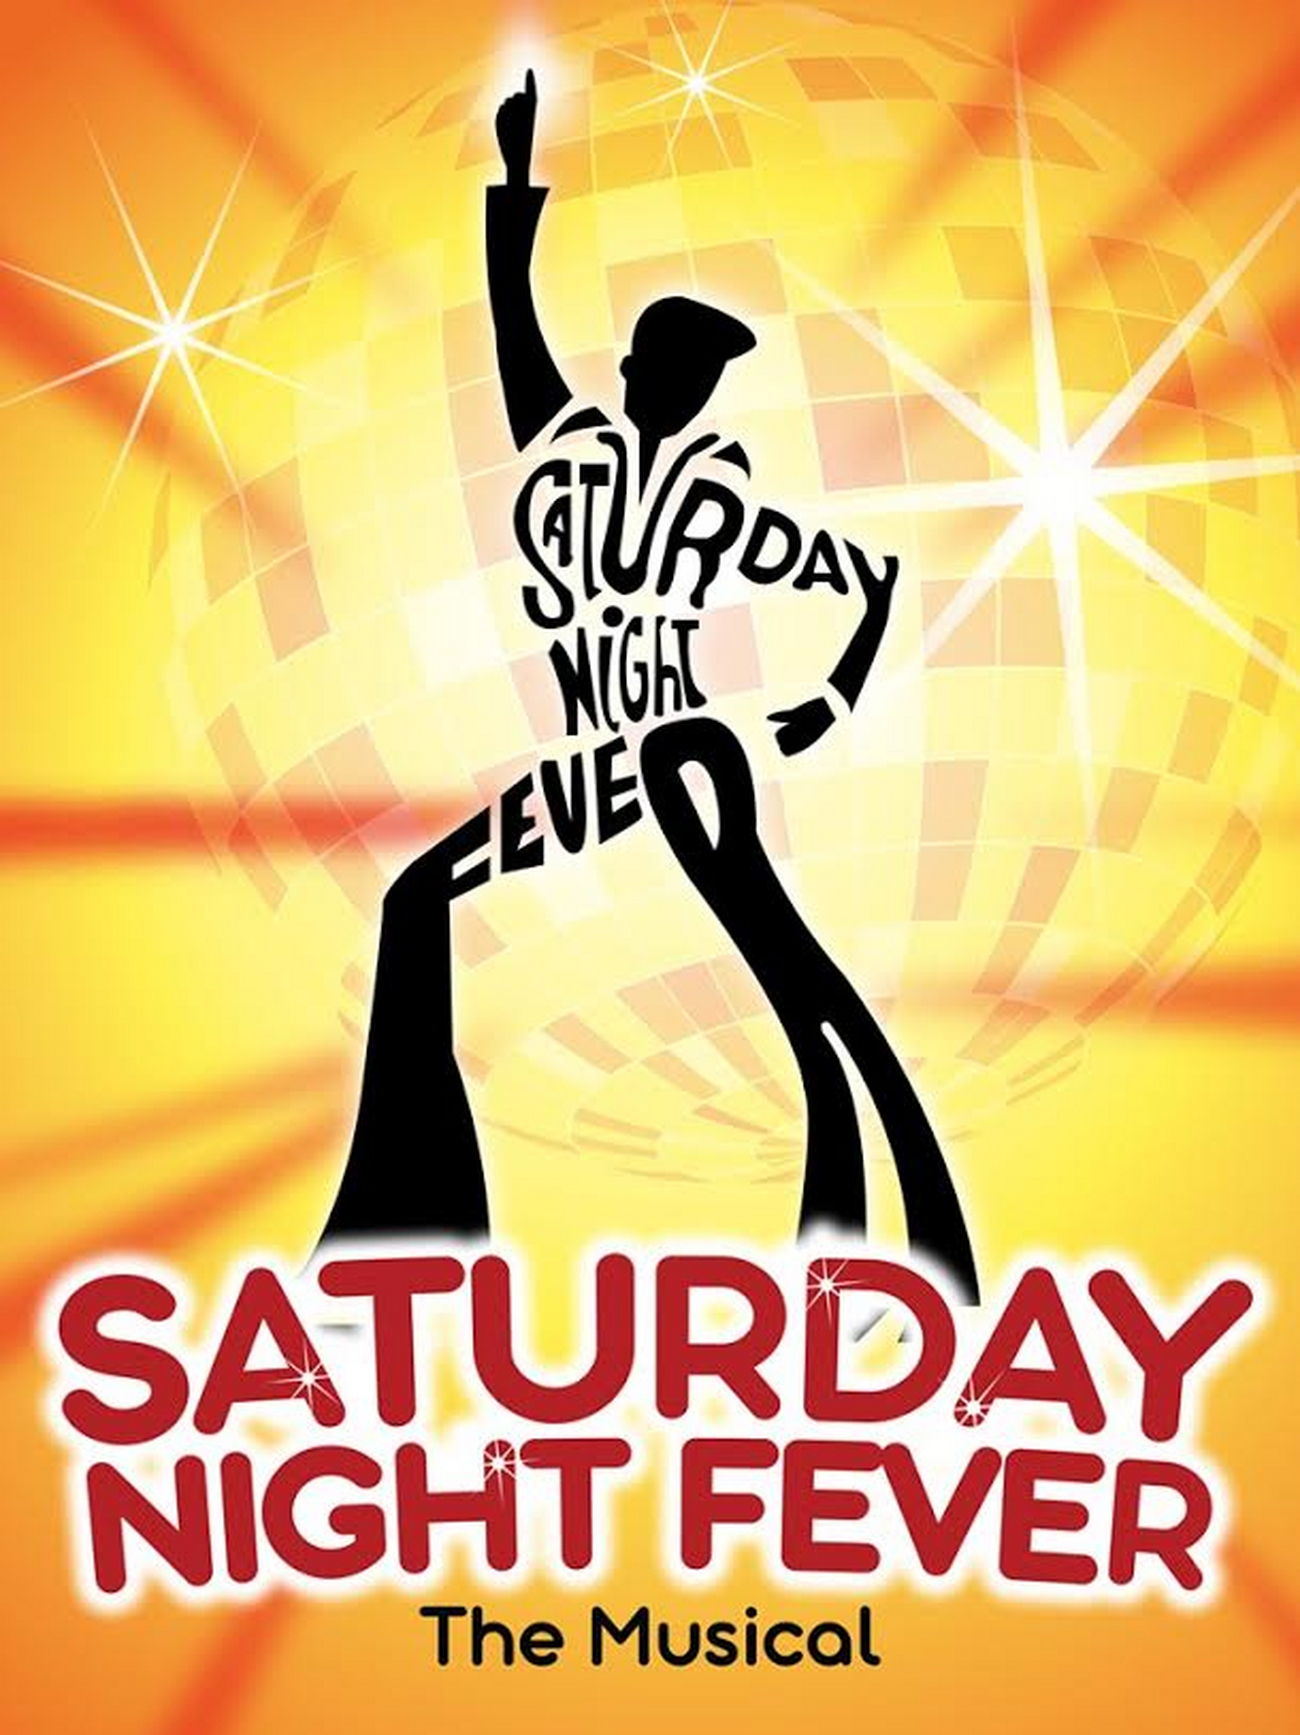 BWW Review SATURDAY NIGHT FEVER THE MUSICAL at John W. Engeman Theater